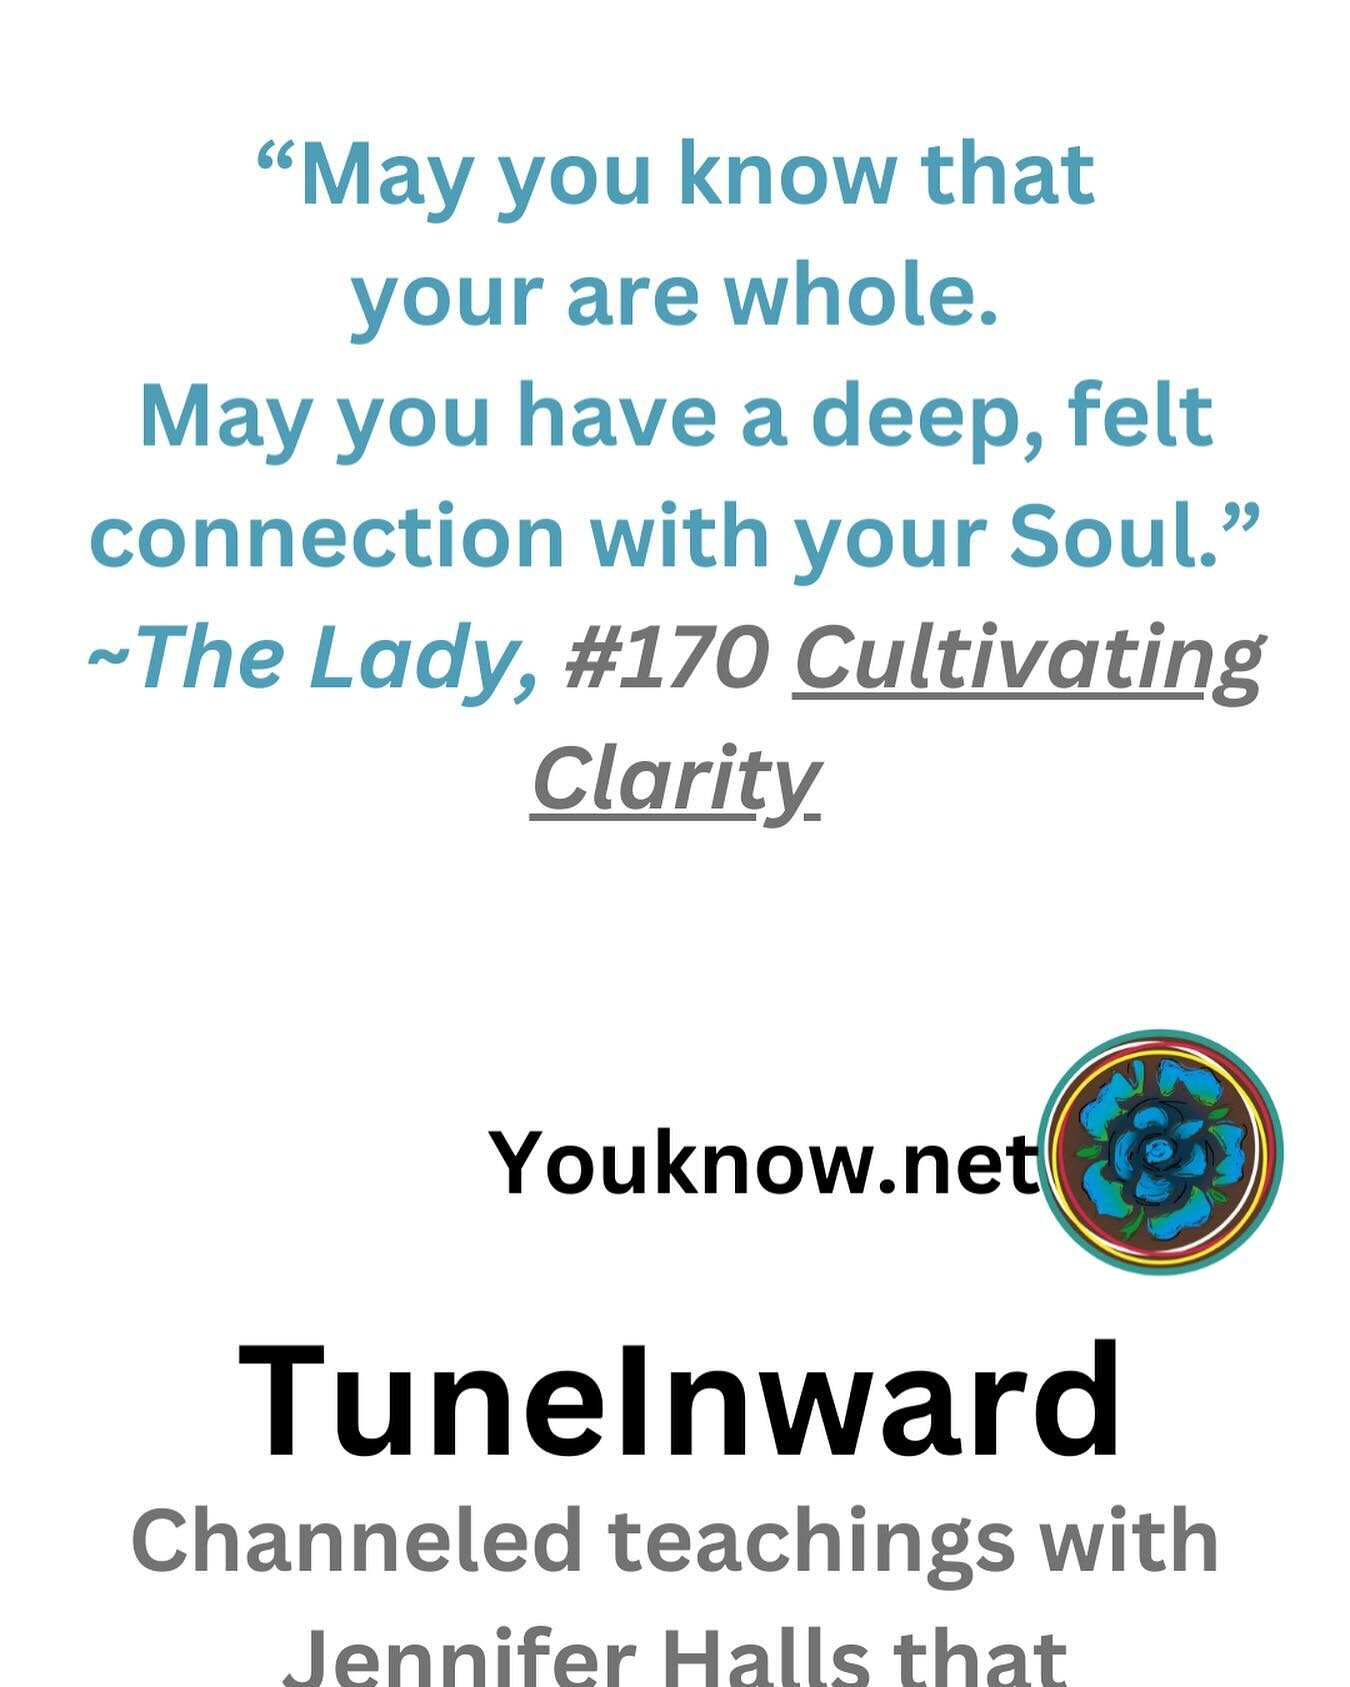 Last night&rsquo;s TuneInward has fast, easy ways to gain clarity-to experience now go to Youknow.net 

#followyourintuition
#intuitivehealing
#trustyourintuition
#oldwounds
#knowyourself
#embodiedhealing
#clearblockstointuition
#intuitionquot